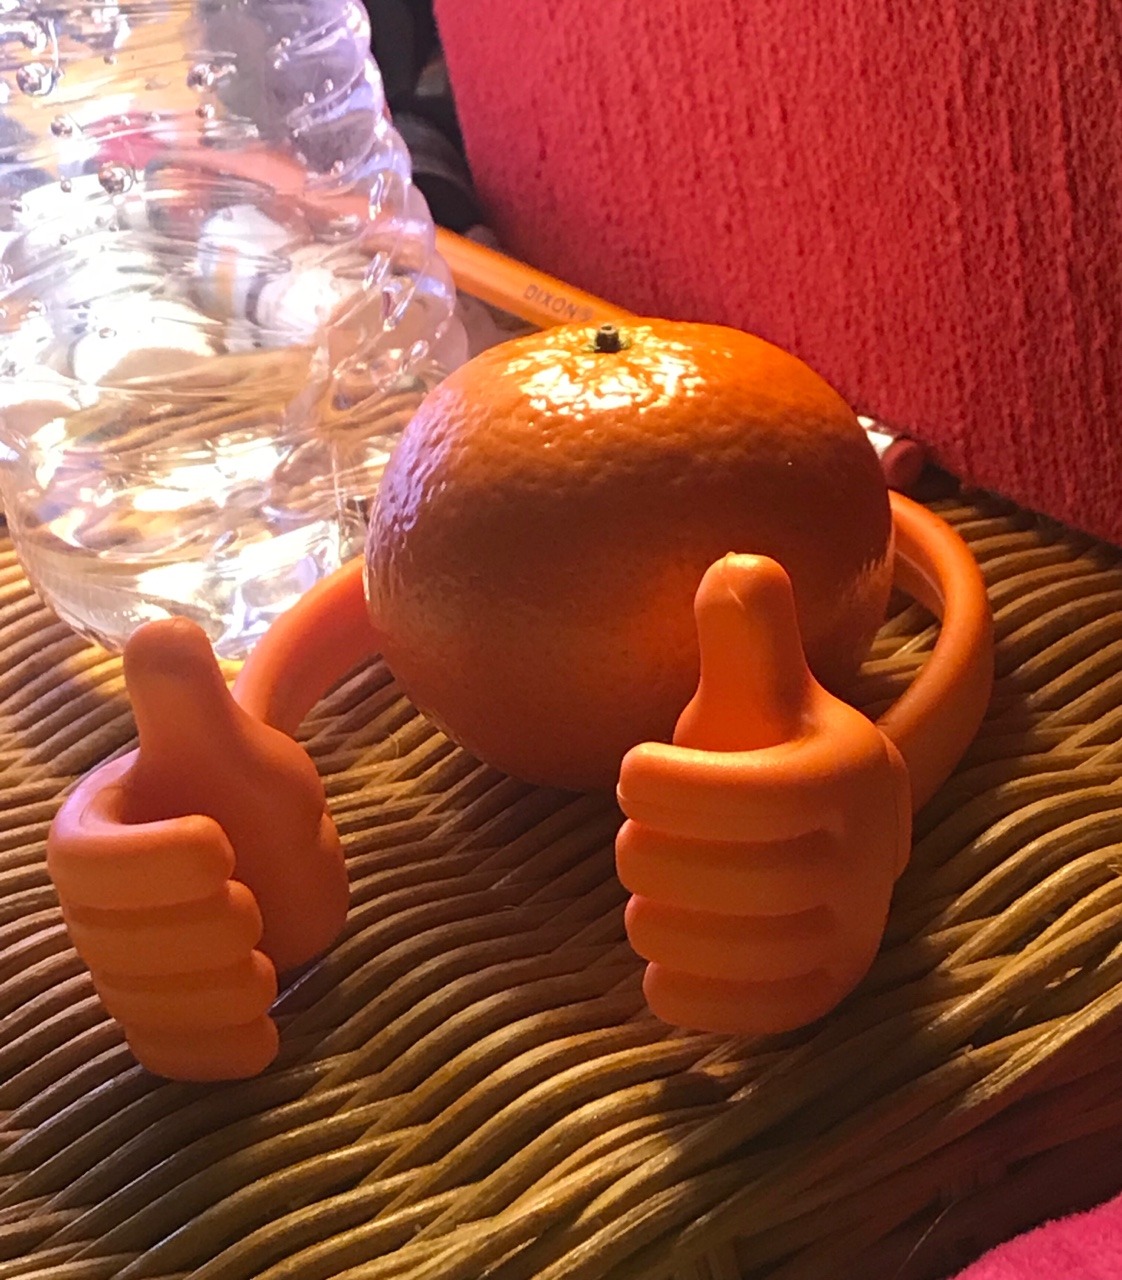 pancakewithanxiety:  voltronic2000:  So I have this hand thing that holds your phone up on a desk and I put an orange in the middle of it to eat later and didn’t even realize till just now that it looks like the orange is giving me two thumbs upThanks